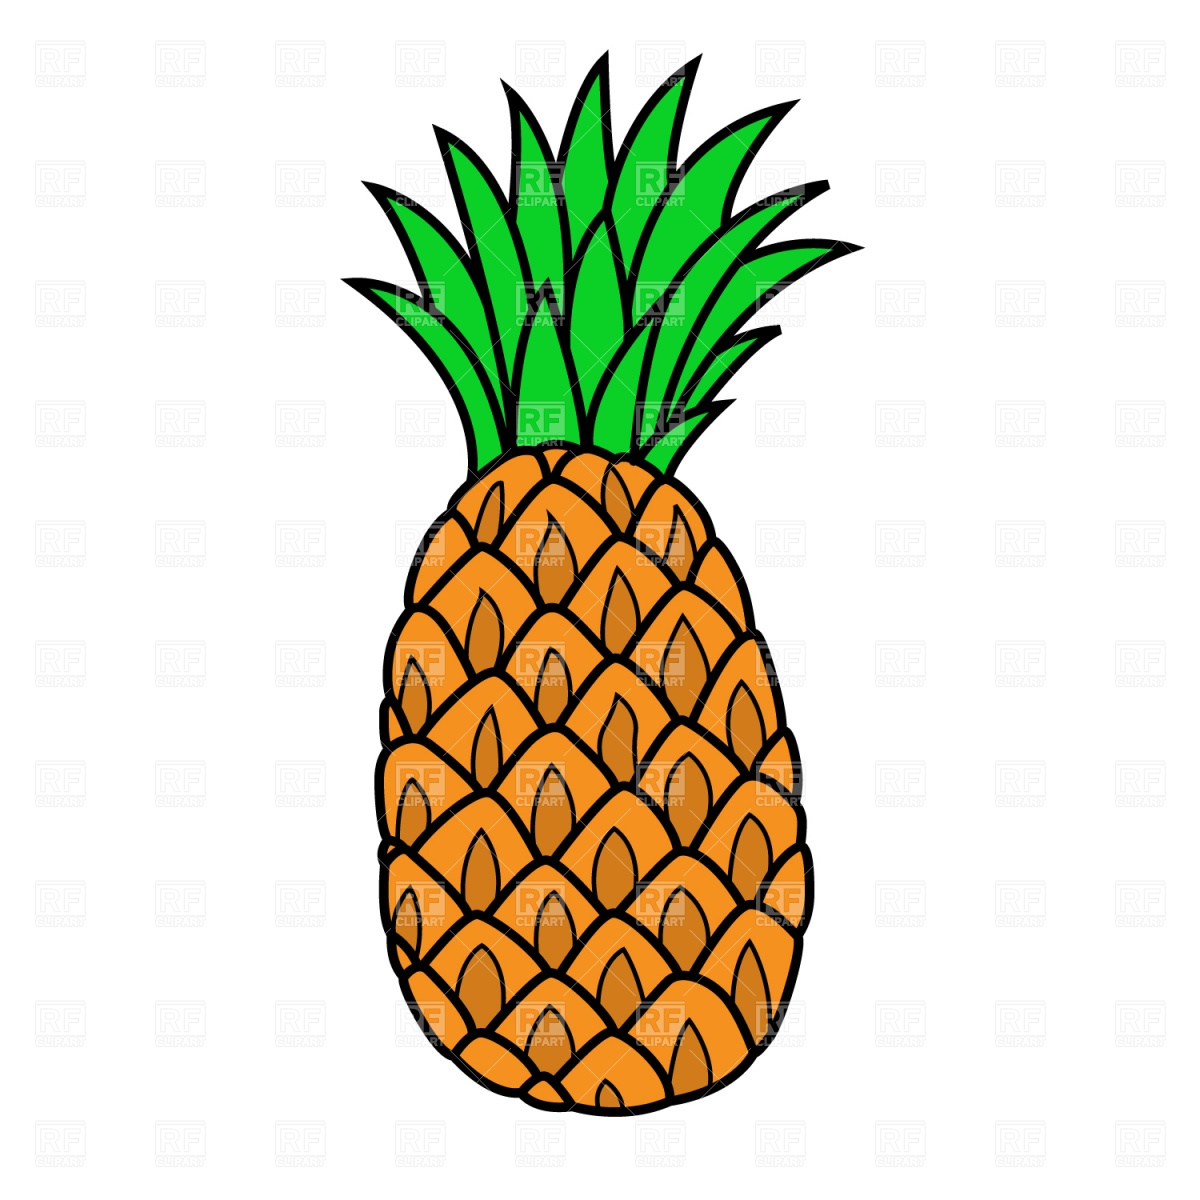 Pineapple Clipart Black And White   Clipart Panda   Free Clipart